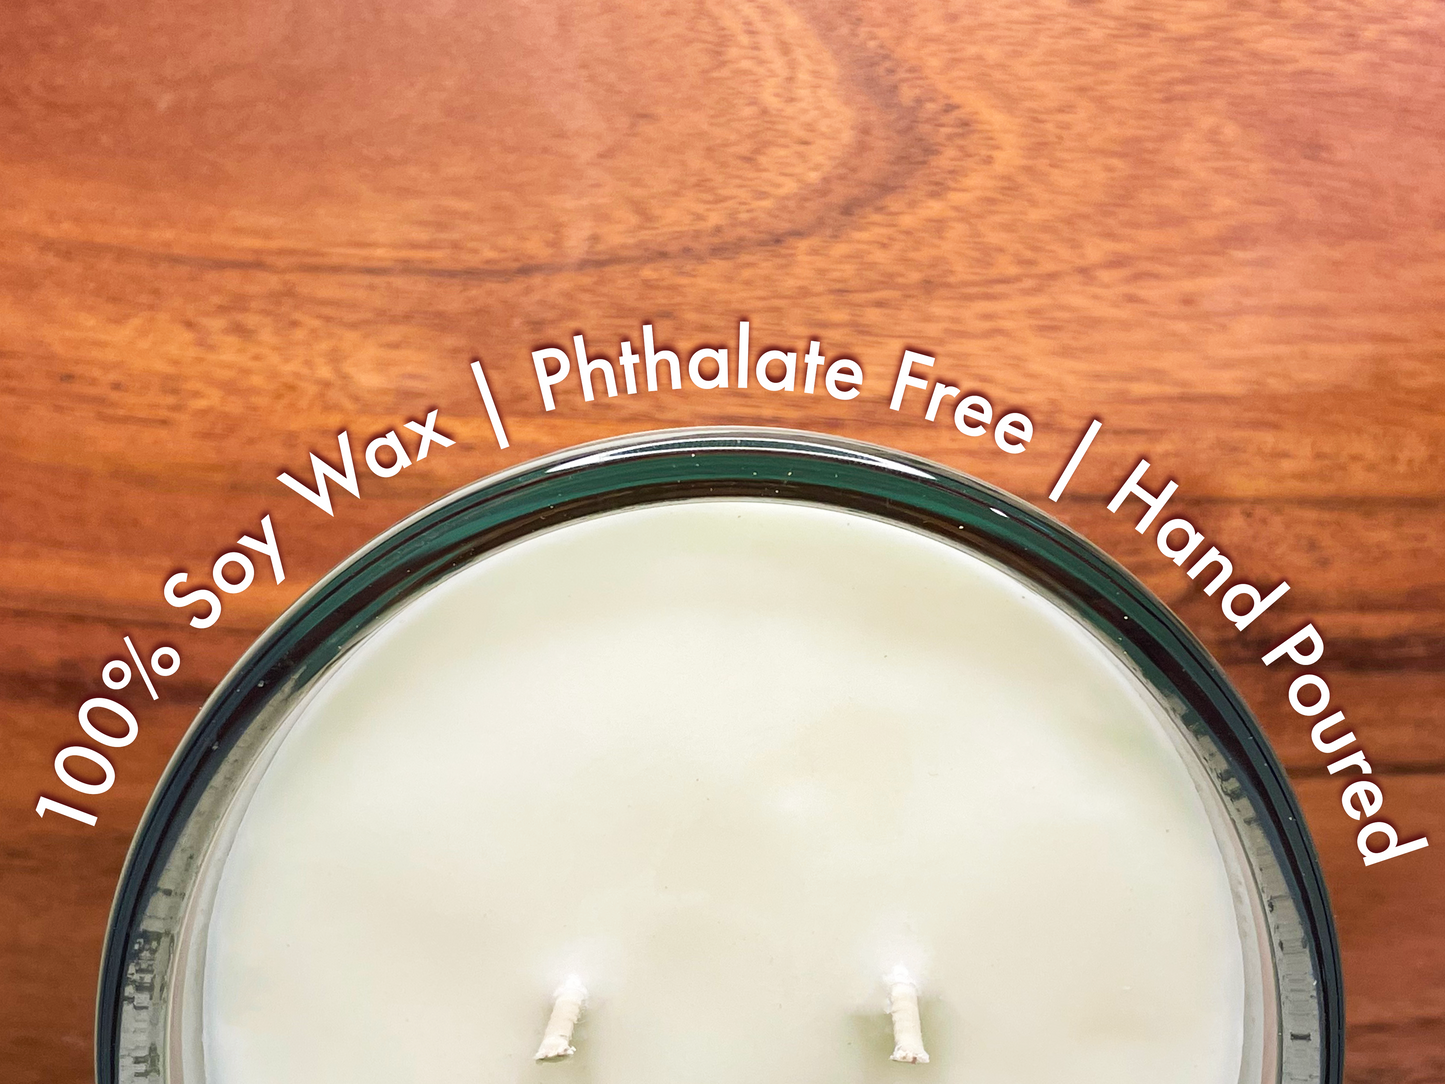 top view of a candle halfway off the photo with the words wrapped around the candle 100% soy wax, phthalate free, hand poured with a wood grain background.